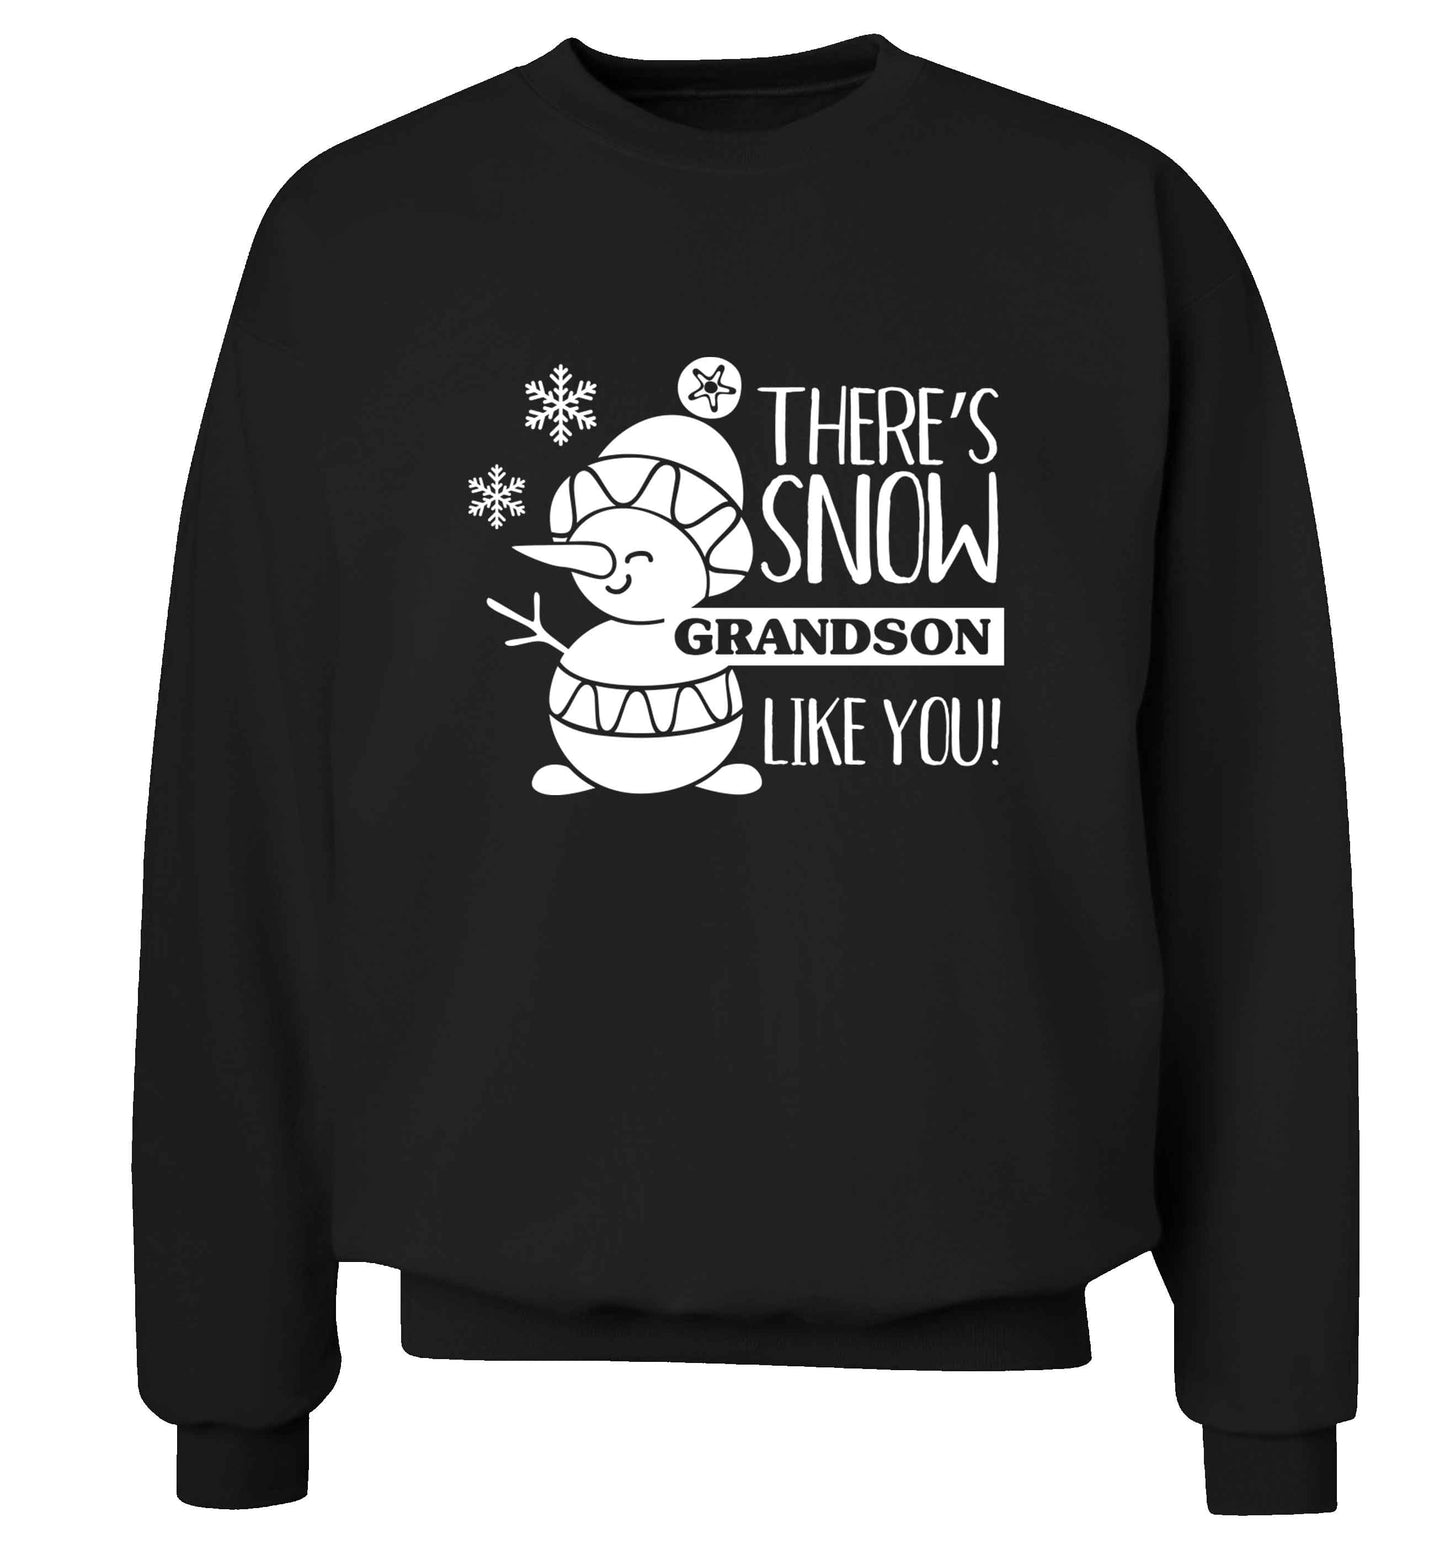 There's snow grandson like you adult's unisex black sweater 2XL